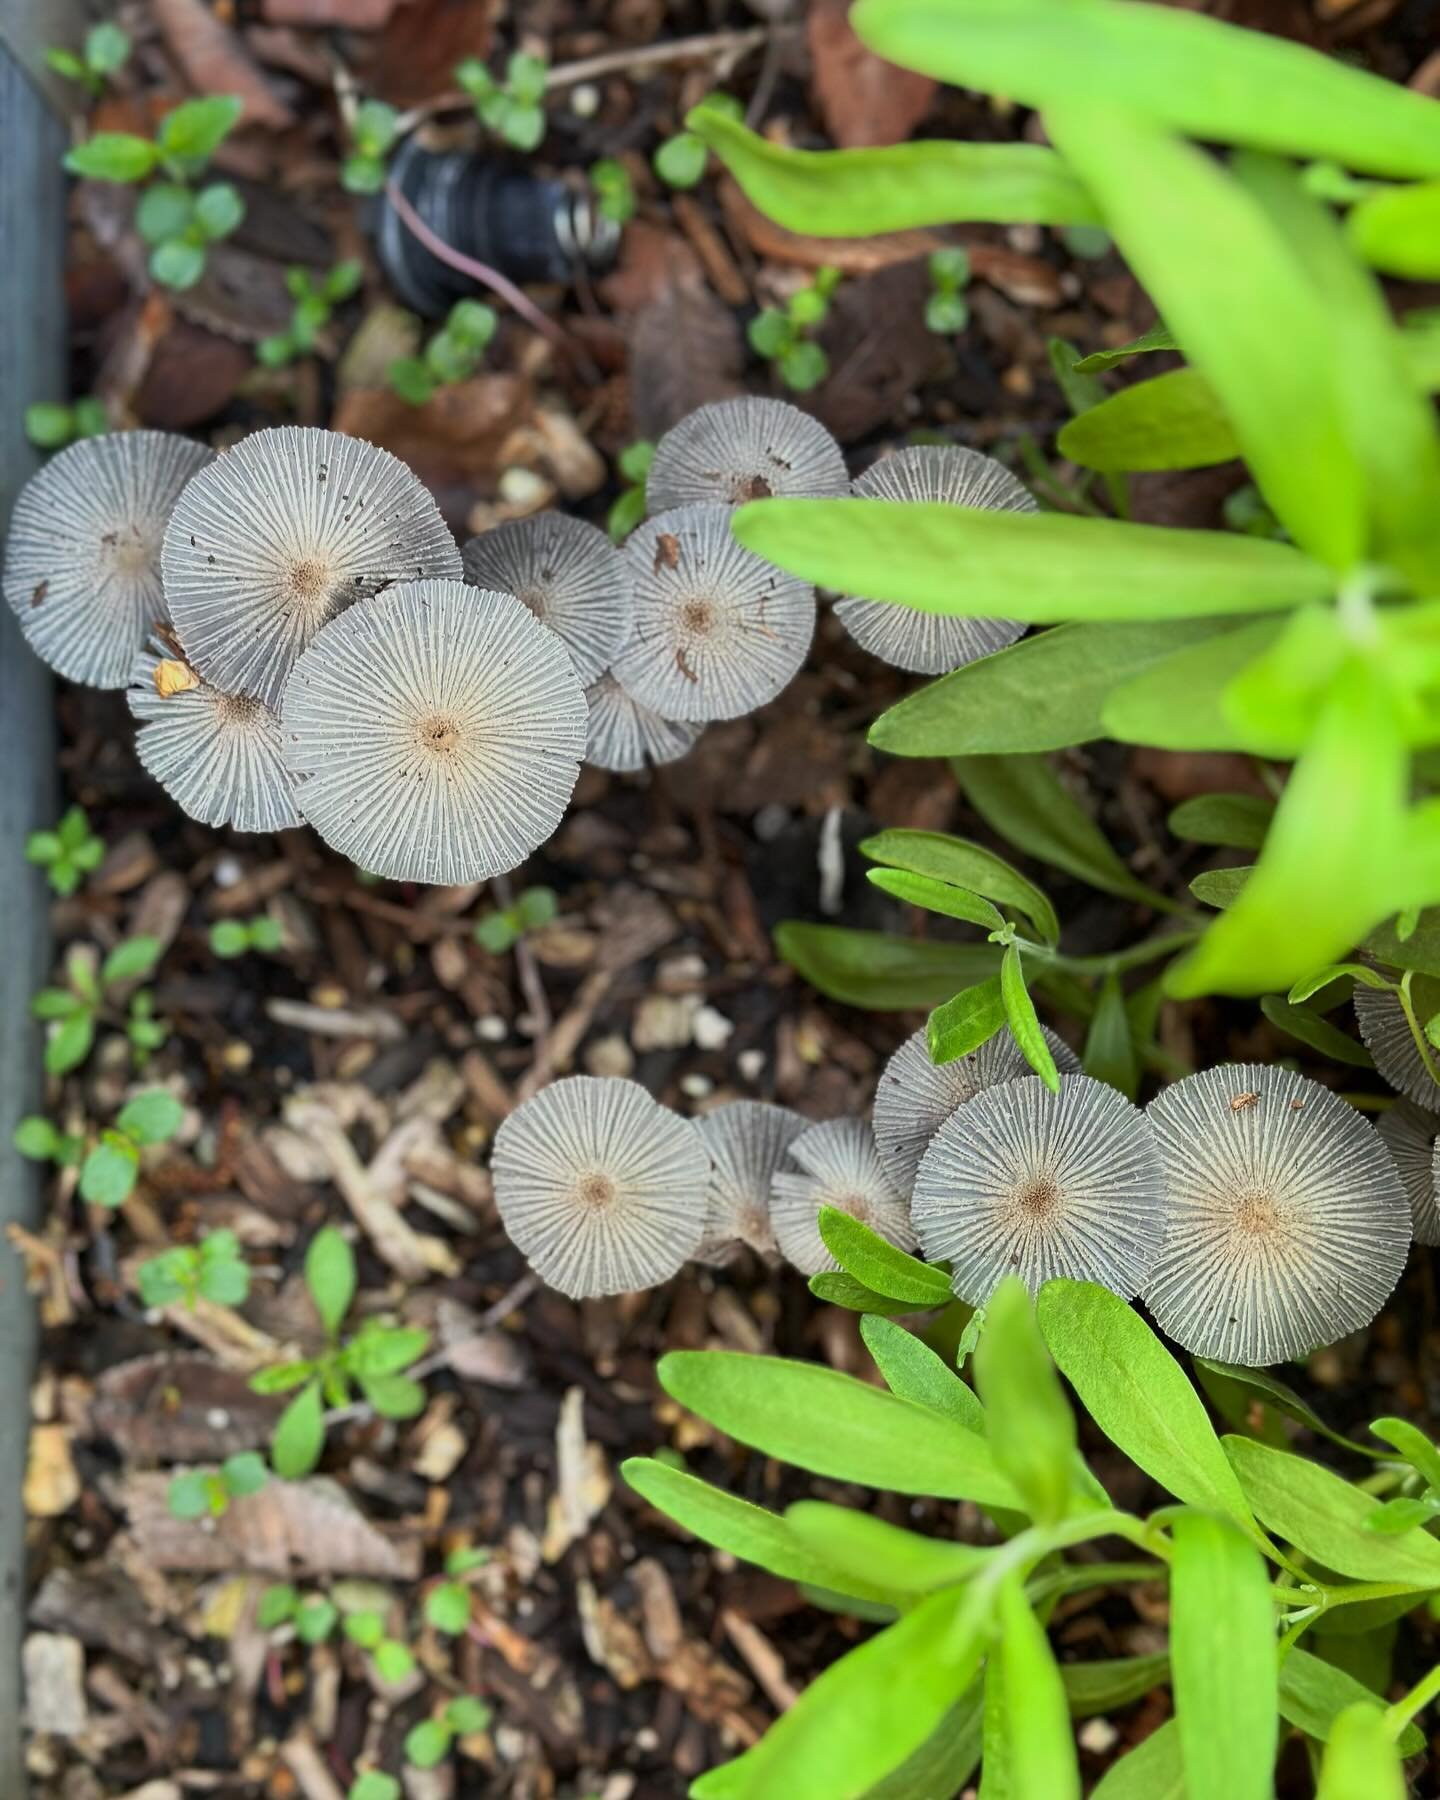 Spending this moody Monday morning in the mushroom patch of our healing gardens. It seems even the fungi understand the power of persistence, community &amp; rooting where we are planted. 🍄&zwj;🟫🌿✨